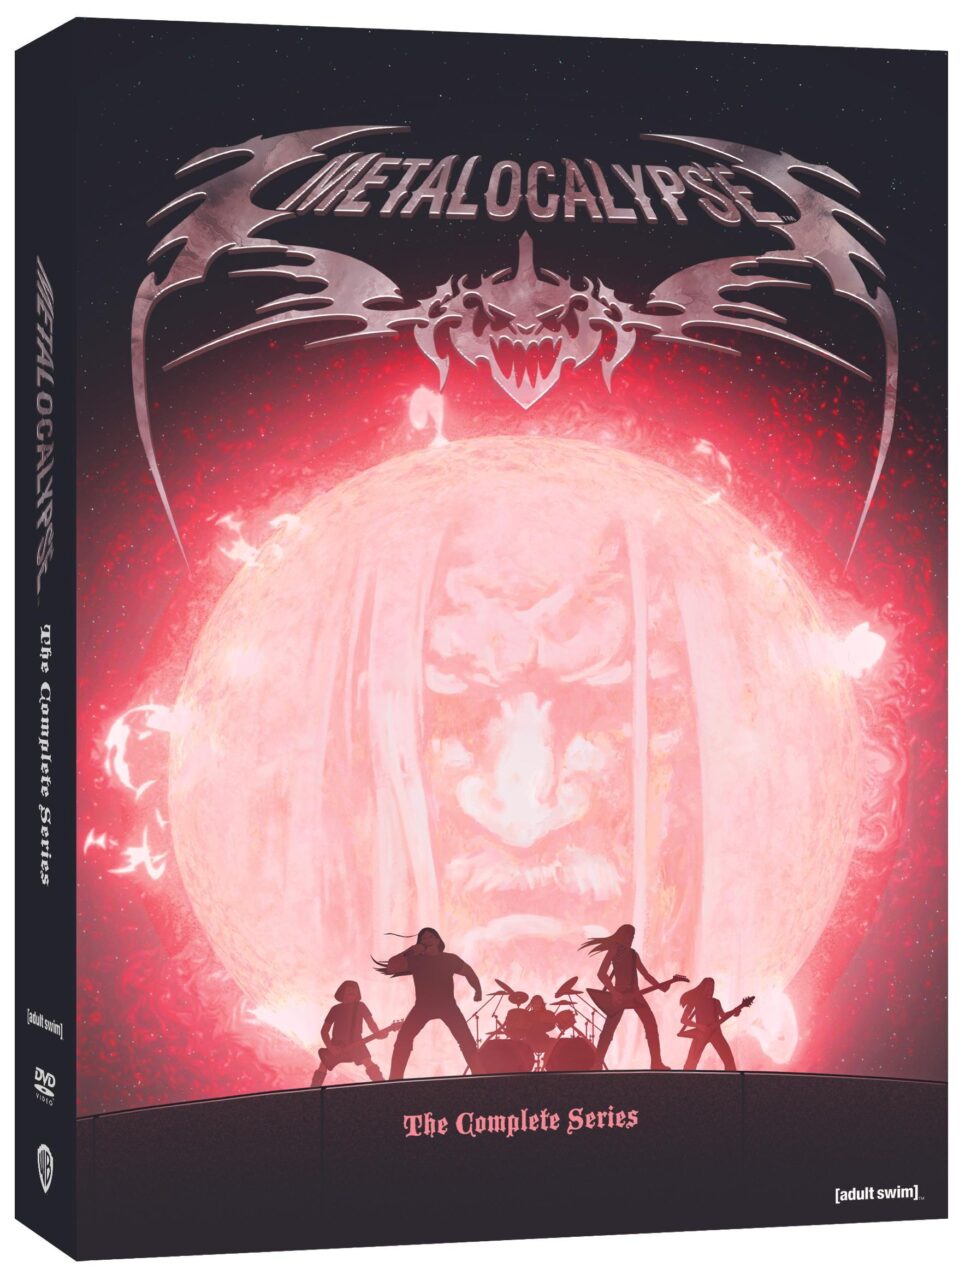 Metalocalypse: The Complete Series DVD cover (Warner Bros. Discovery Home Entertainment/Adult Swim)